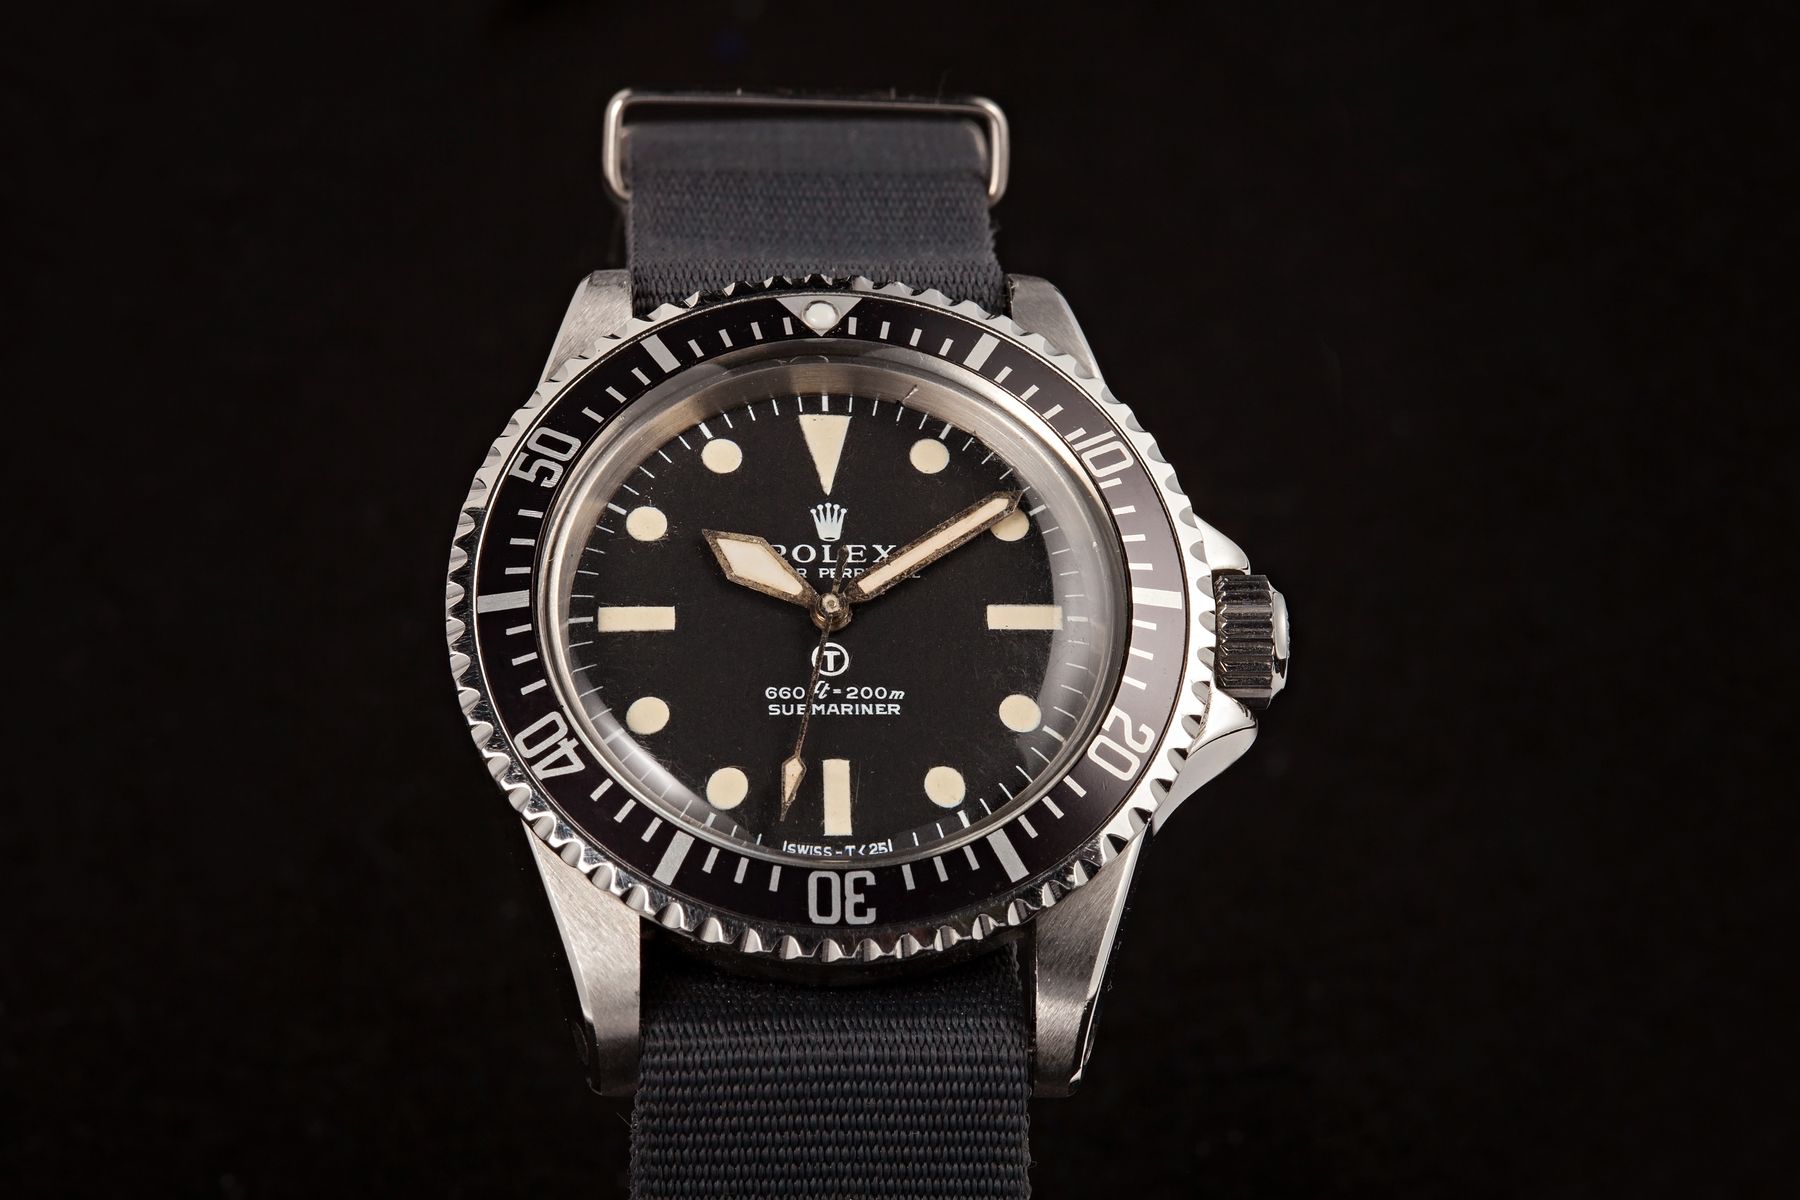 Rolex MilSub Submariner 5517 Military Issued Watch